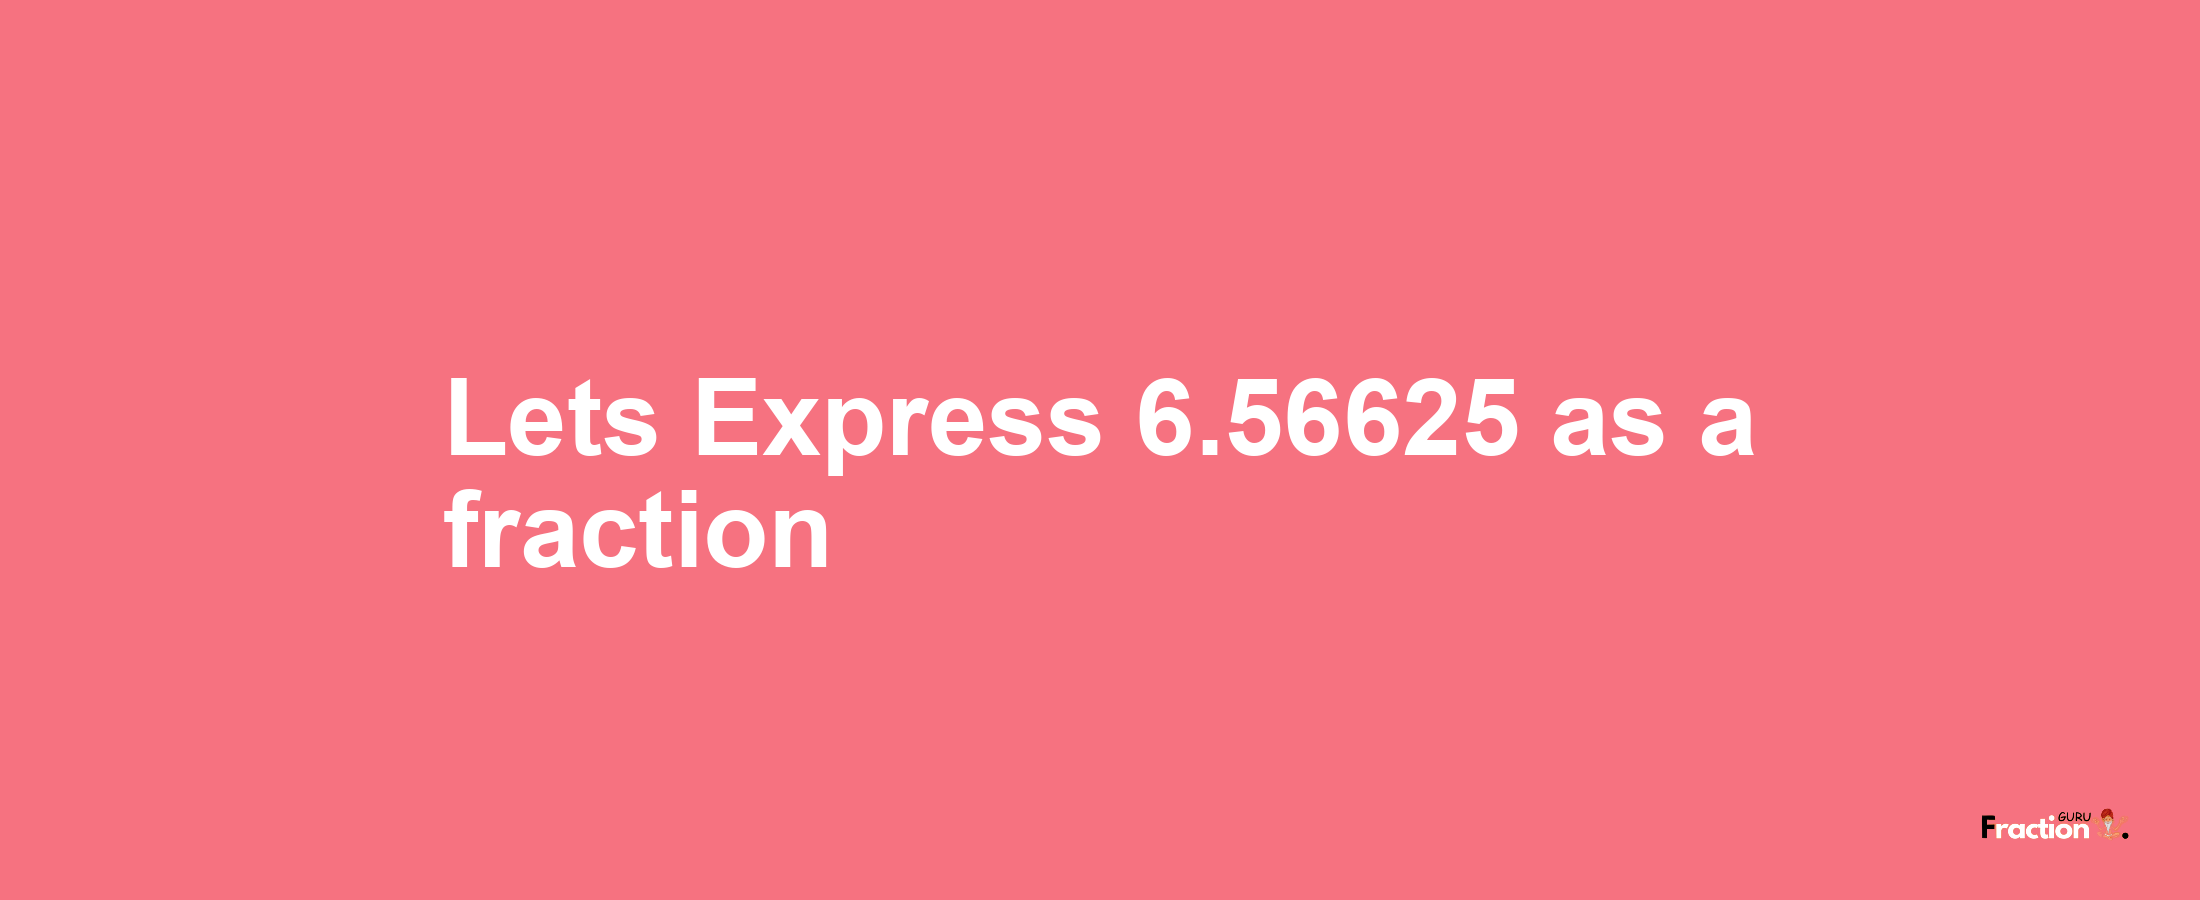 Lets Express 6.56625 as afraction